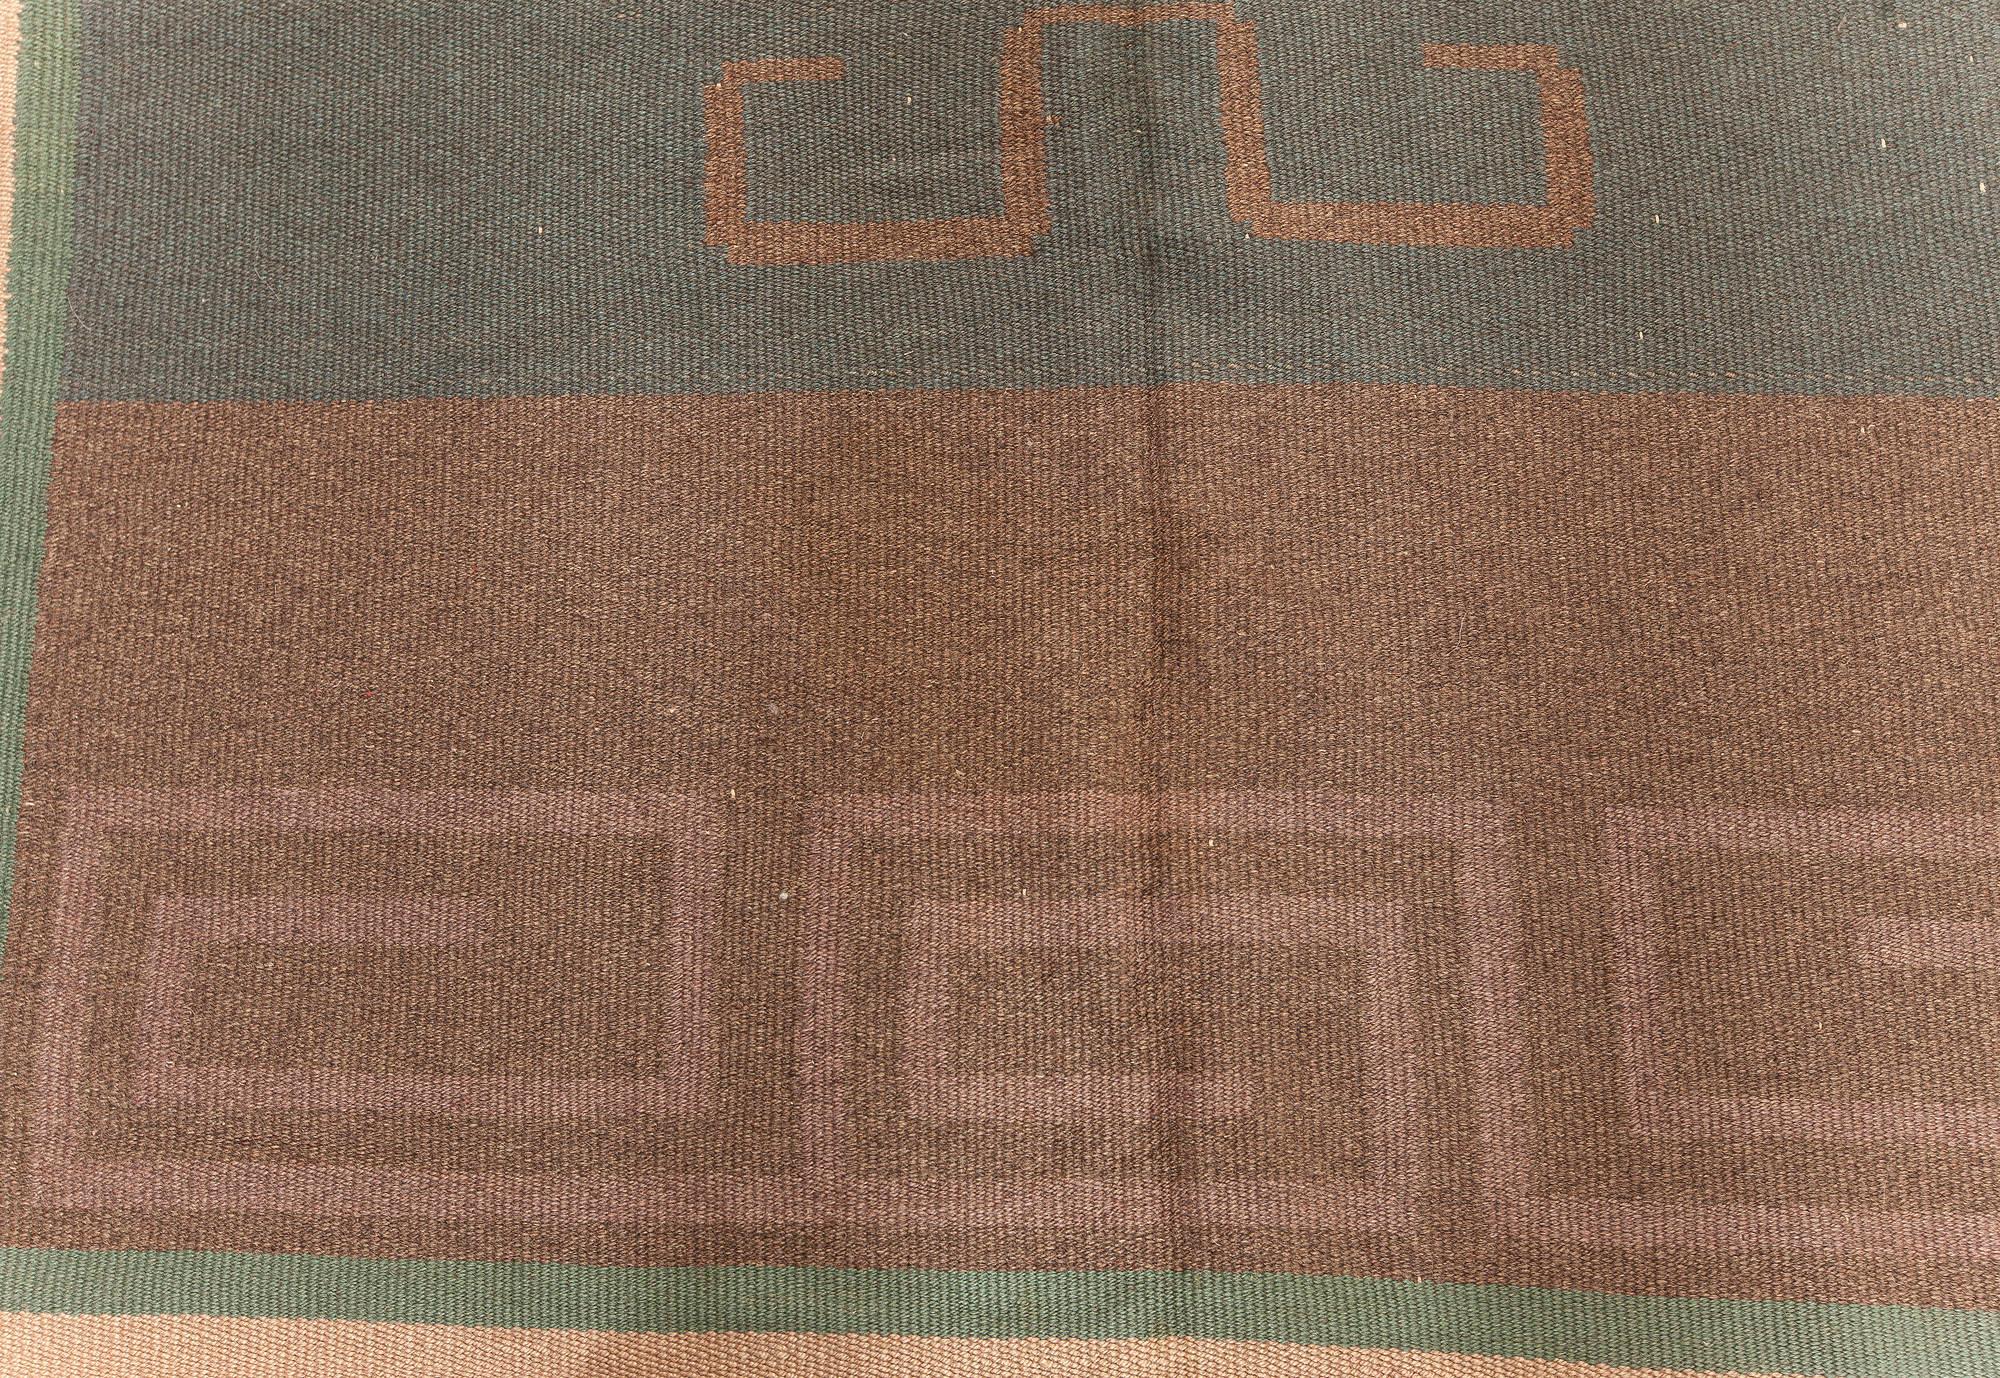 Vintage Scandinavian flat-weave wool rug. Woven initials and date to edge 'IO 1928'
Size: 7'9